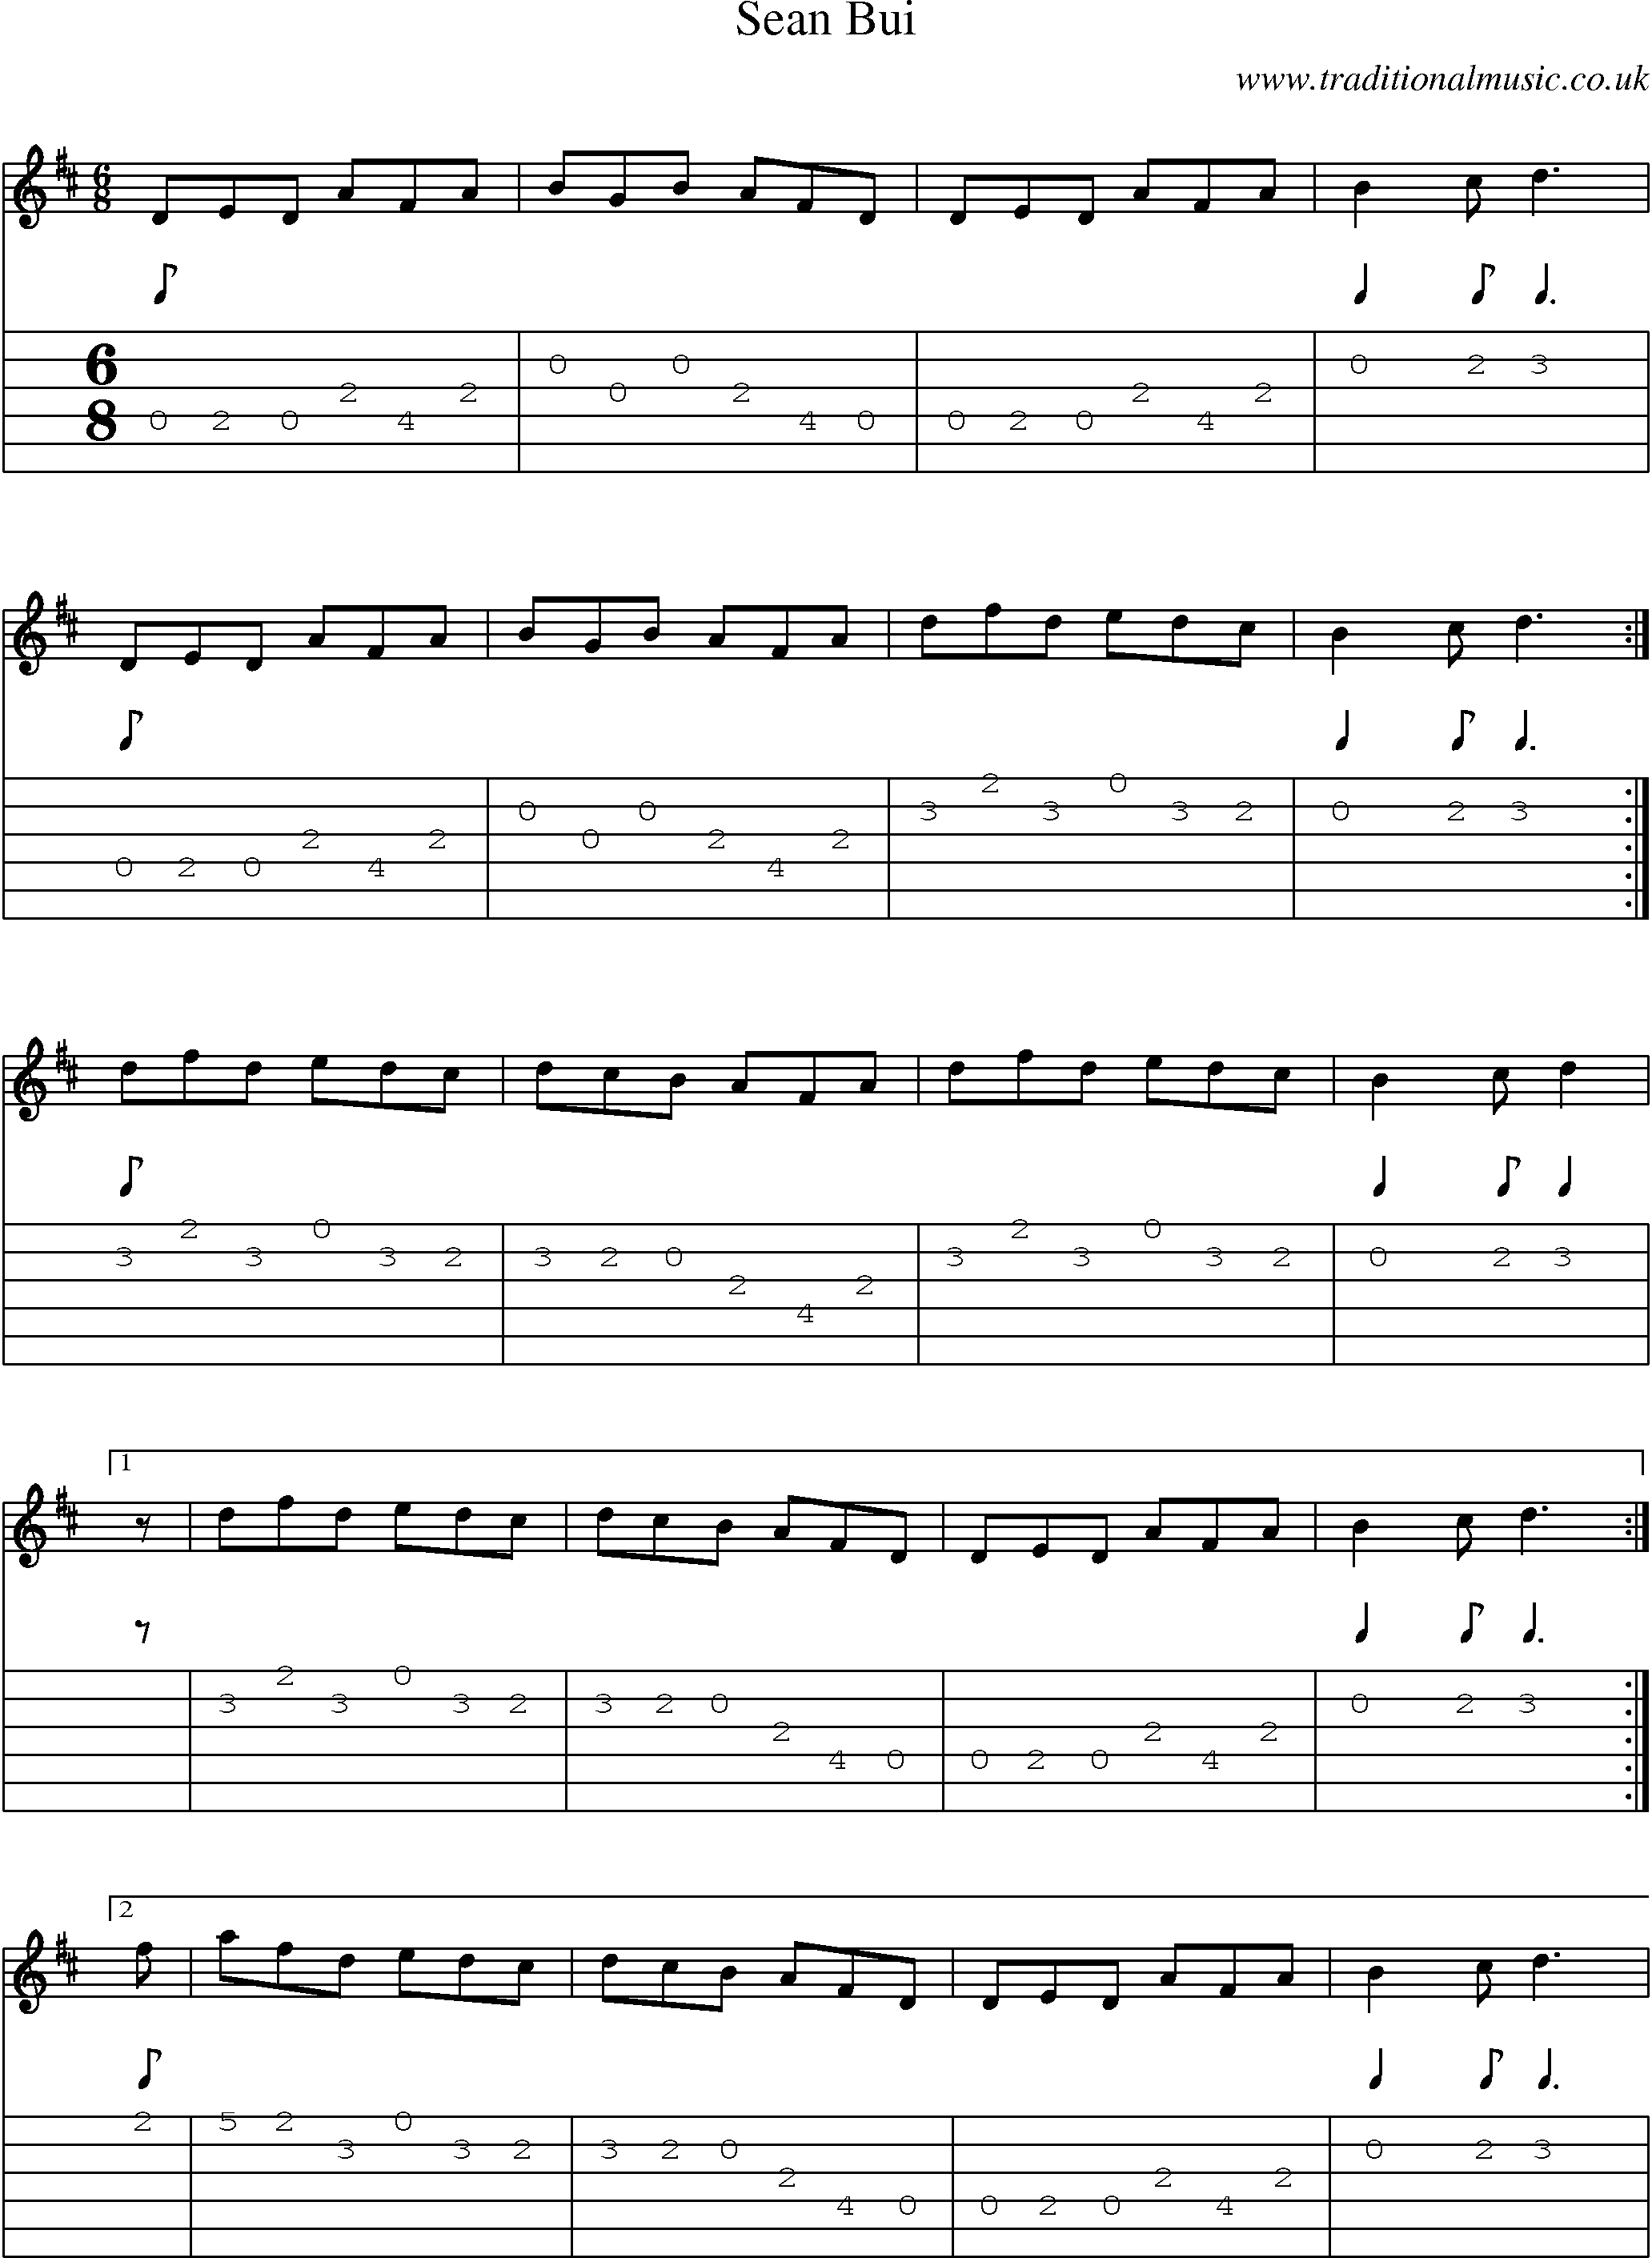 Music Score and Guitar Tabs for Sean Bui